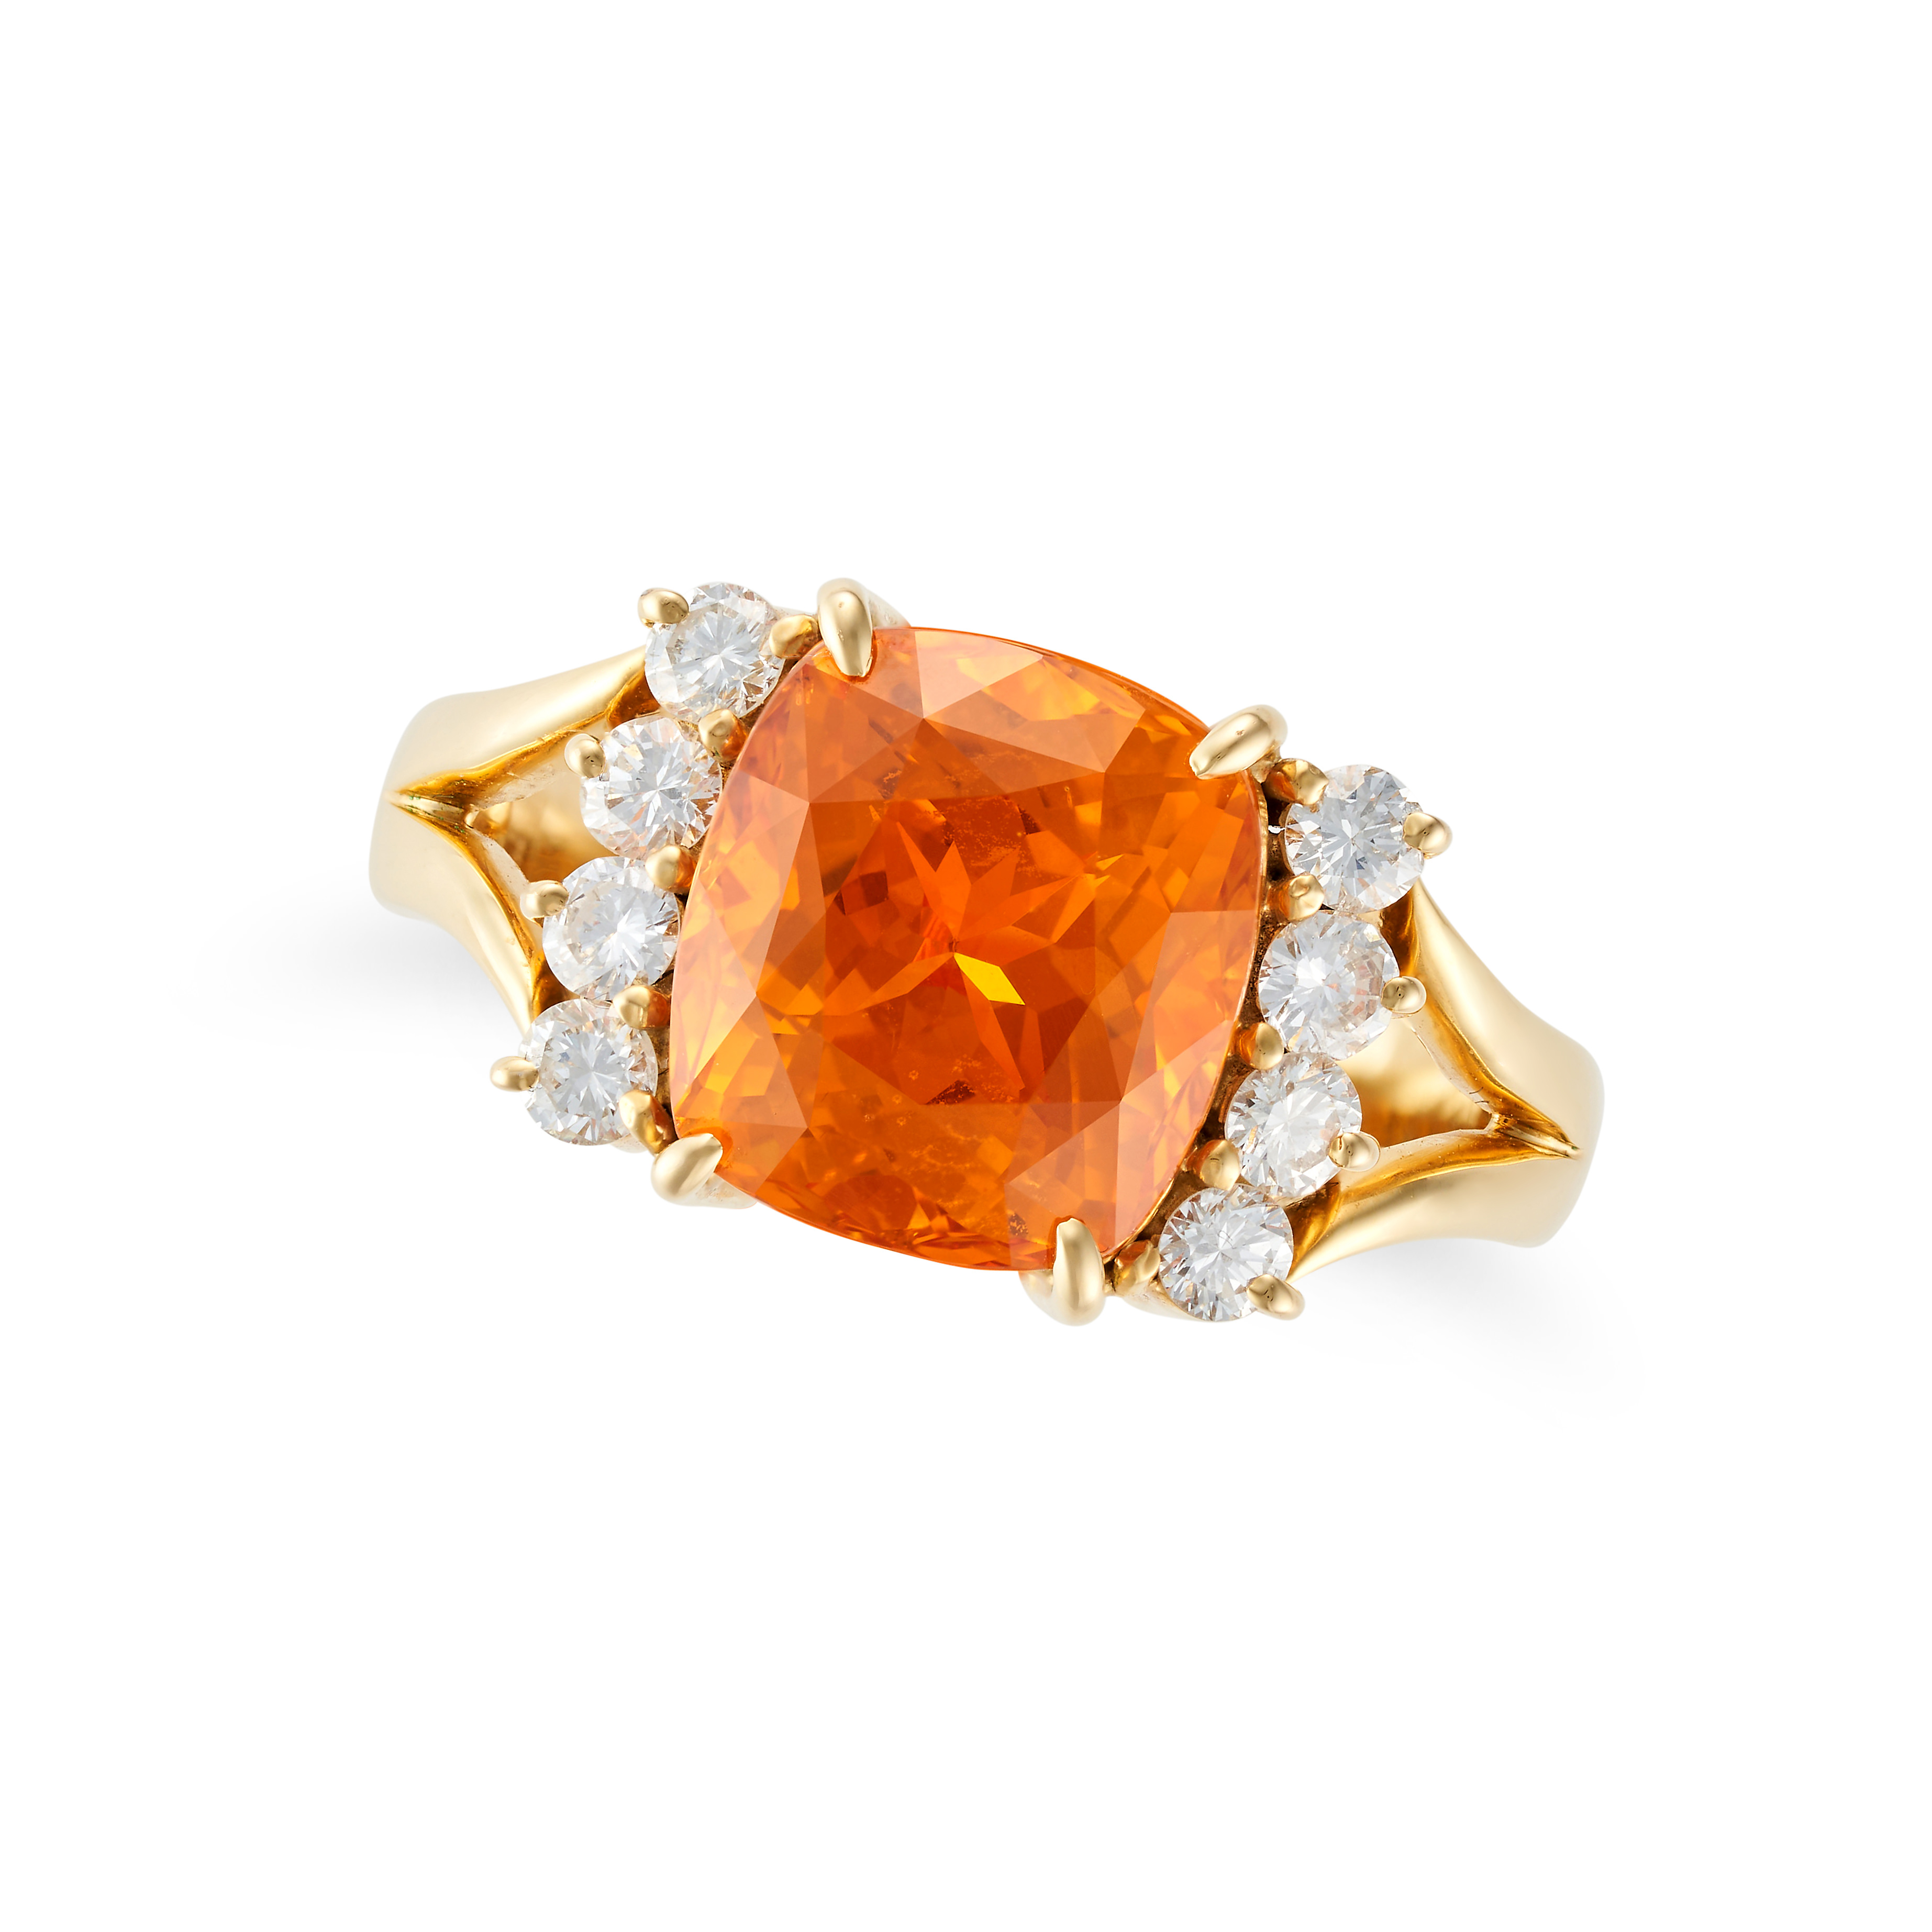 AN ORANGE SAPPHIRE AND DIAMOND RING set with a cushion cut orange sapphire of 7.11 carats, accent... - Image 2 of 2